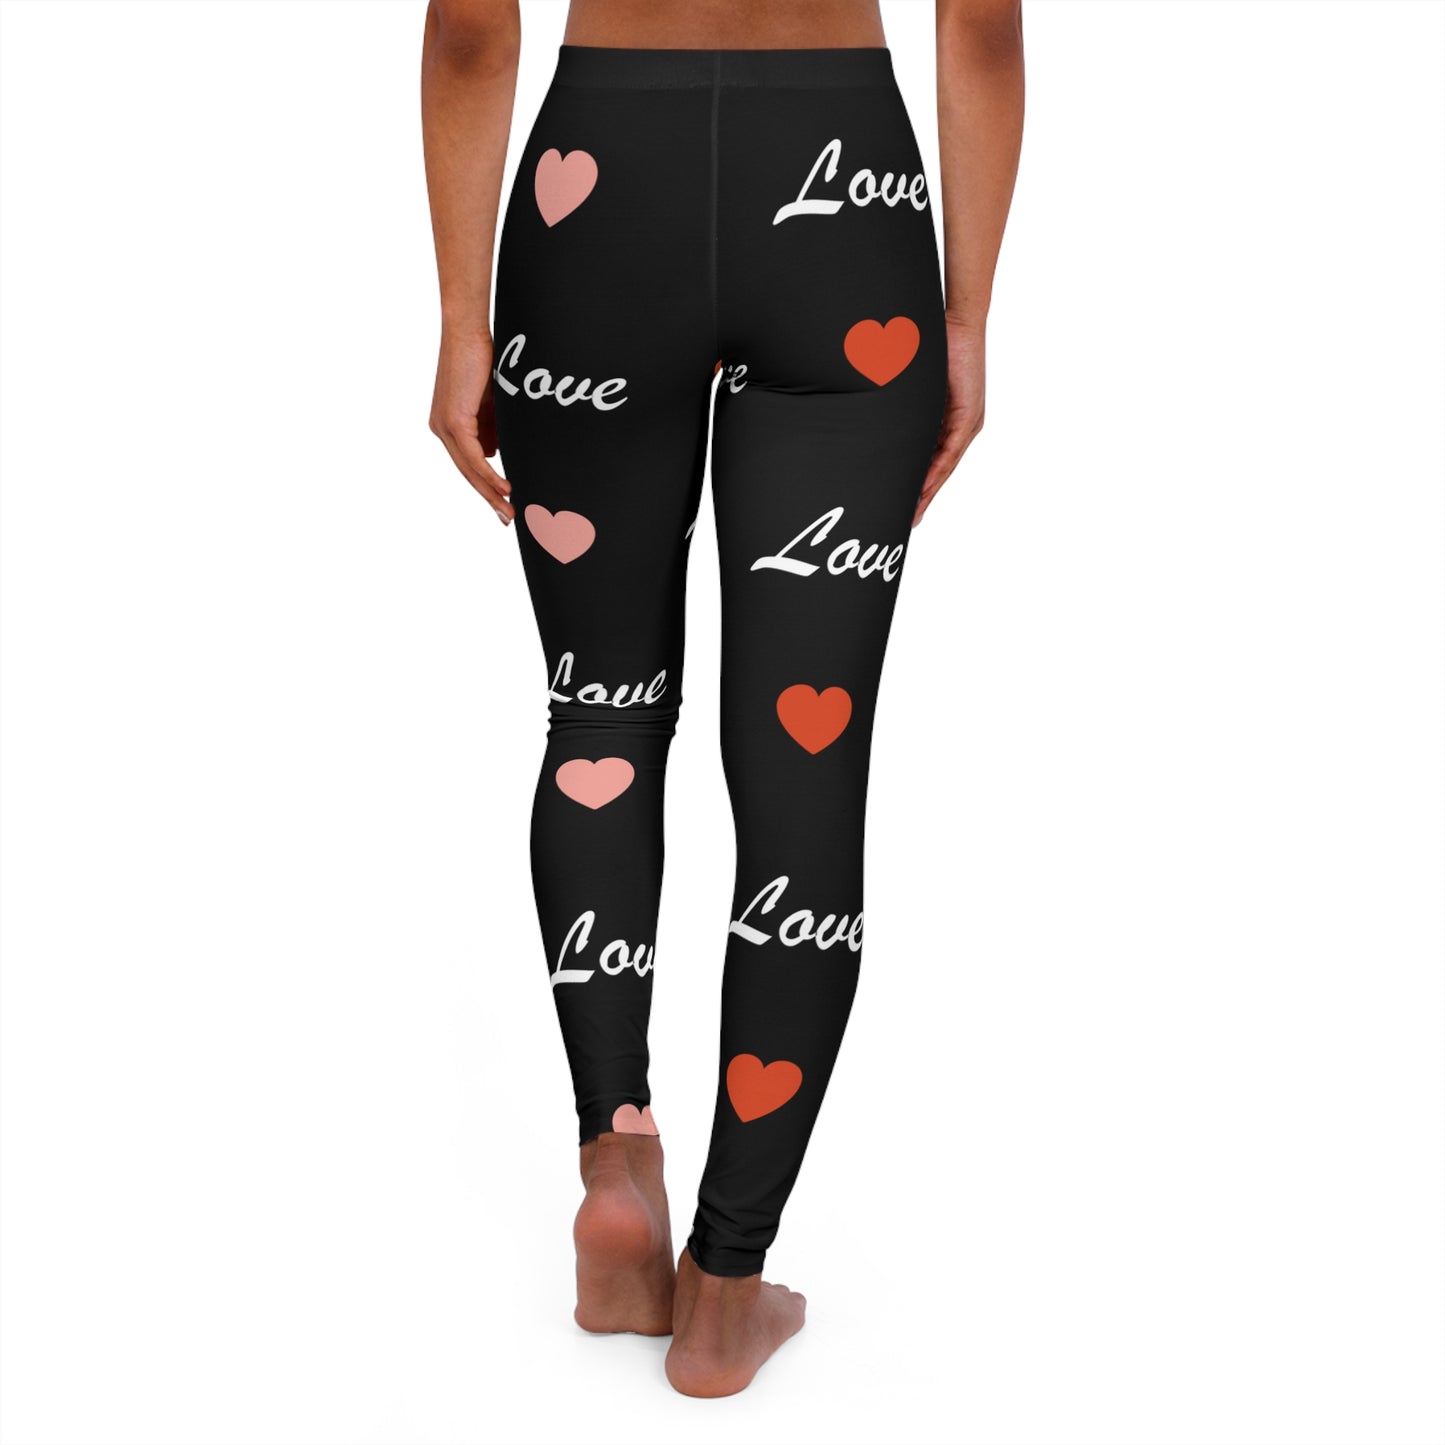 Love Heart Leggings: Expressions of Affection in Style